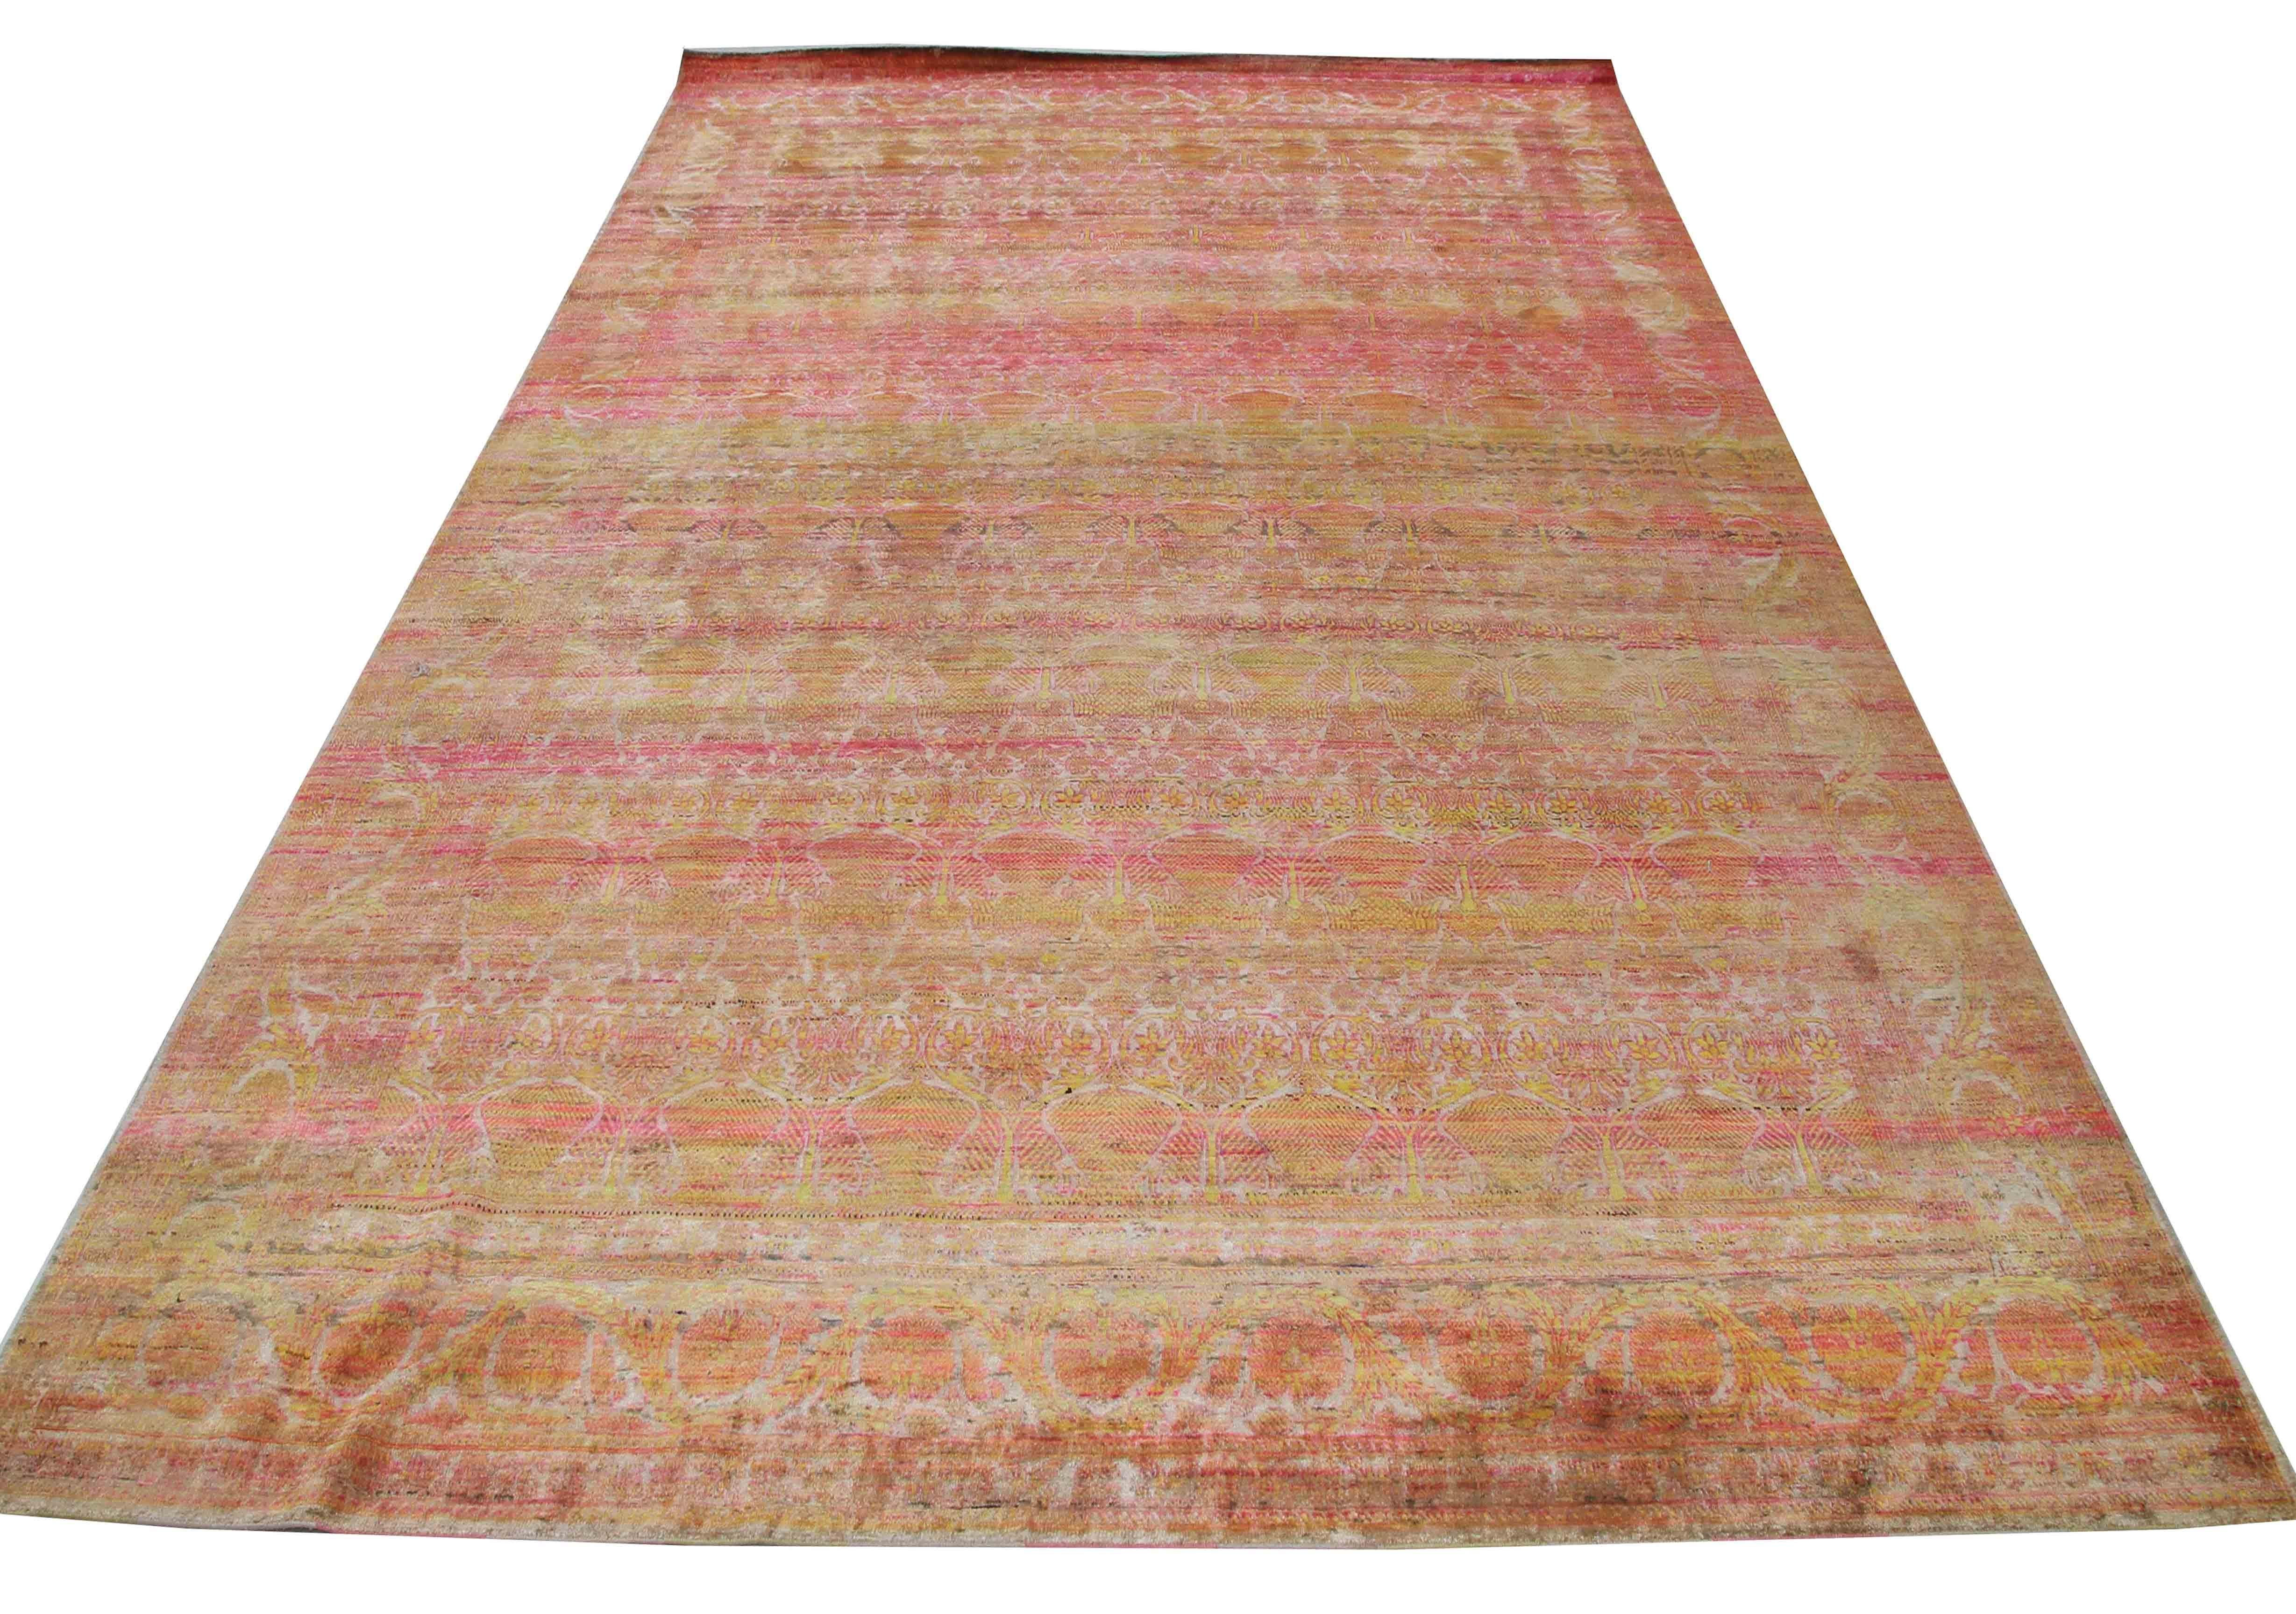 This hand-knotted silk rug is a one-of-a-kind masterpiece that measures 9'9'' x 14'. Hand-knotted in Jaipur, India, this rug is made from recycled silk saris, transforming antique motifs into a field of lively colors. The combination of traditional